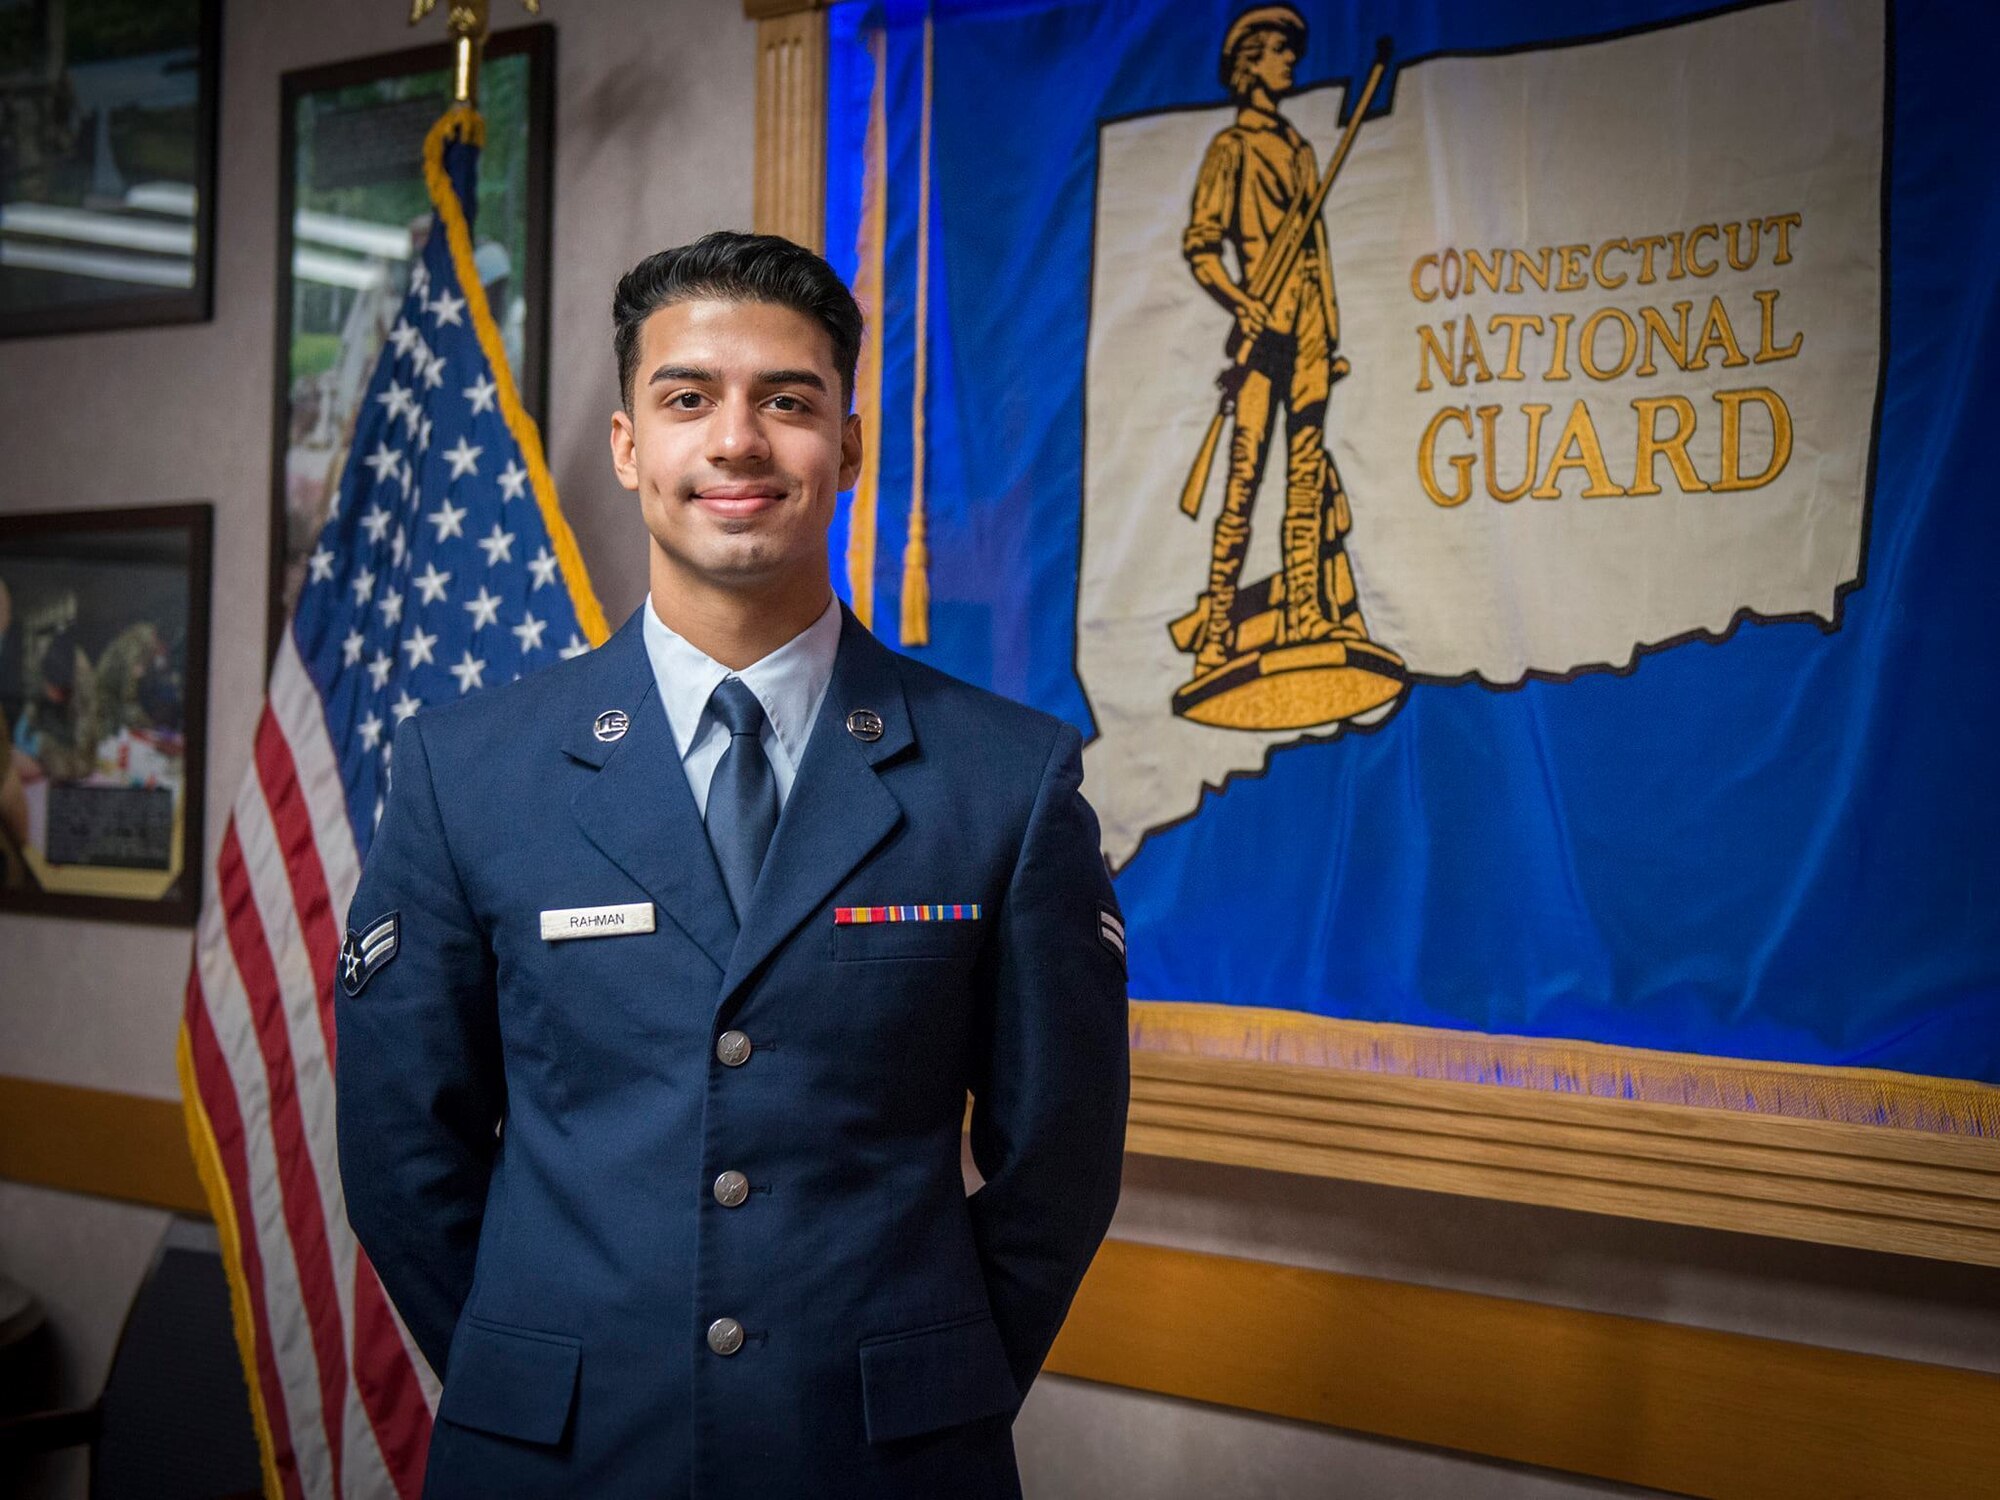 Airman 1st Class Sikander Rahman, a fuel system specialist assigned to the 103rd Maintenance Squadron, accepts the 2020 USO Service Member of the Year Award, Dec. 5, 2020 at the Governor William A. O'Neill State Armory in Hartford, Connecticut. Rahman received the award for rescuing a driver from an overturned vehicle. (U.S. Air National Guard photo by Staff Sgt. Steven Tucker)